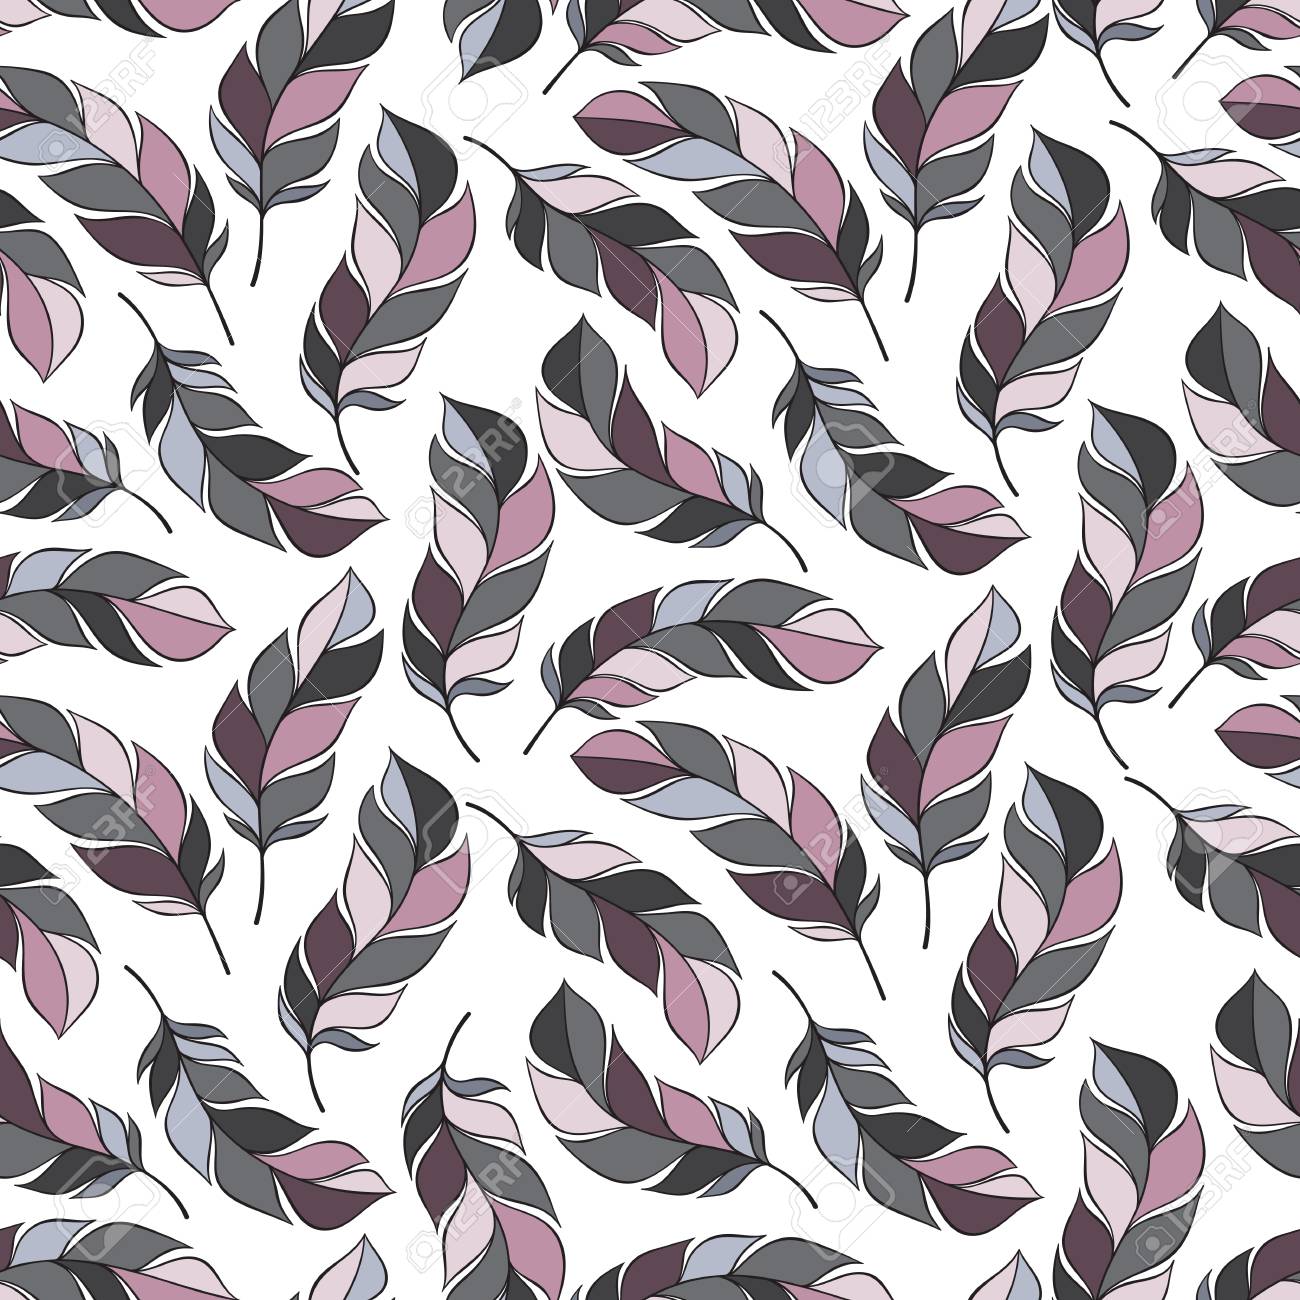 Vintage Seamless Pattern With Hand Drawn Feathers For Desktop